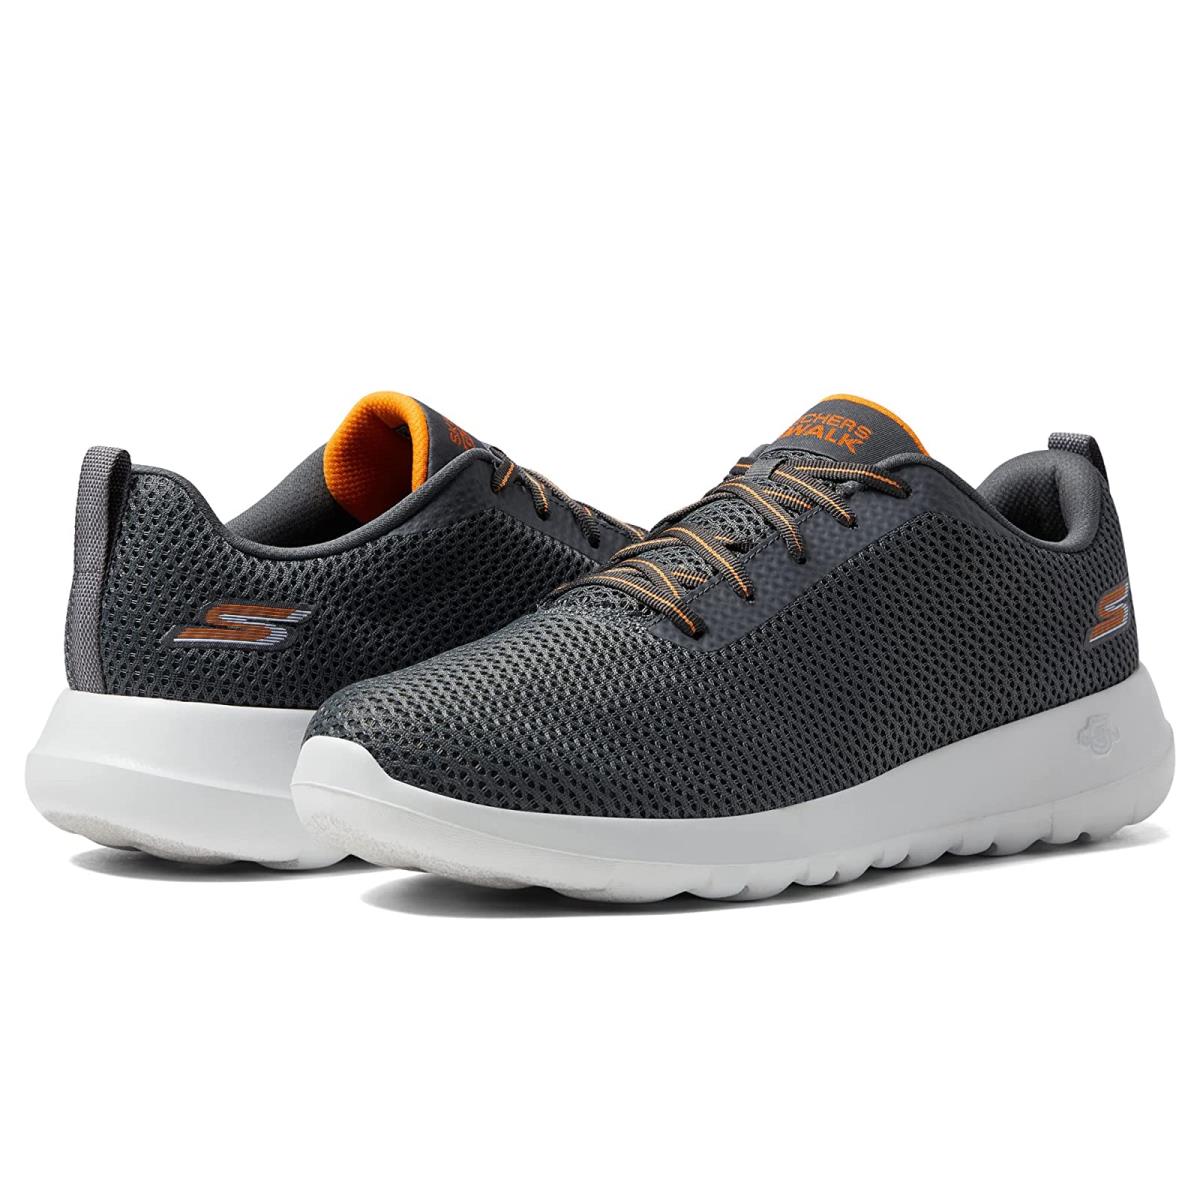 Man`s Sneakers Athletic Shoes Skechers Performance Go Walk Max - 54601 Charcoal/Orange